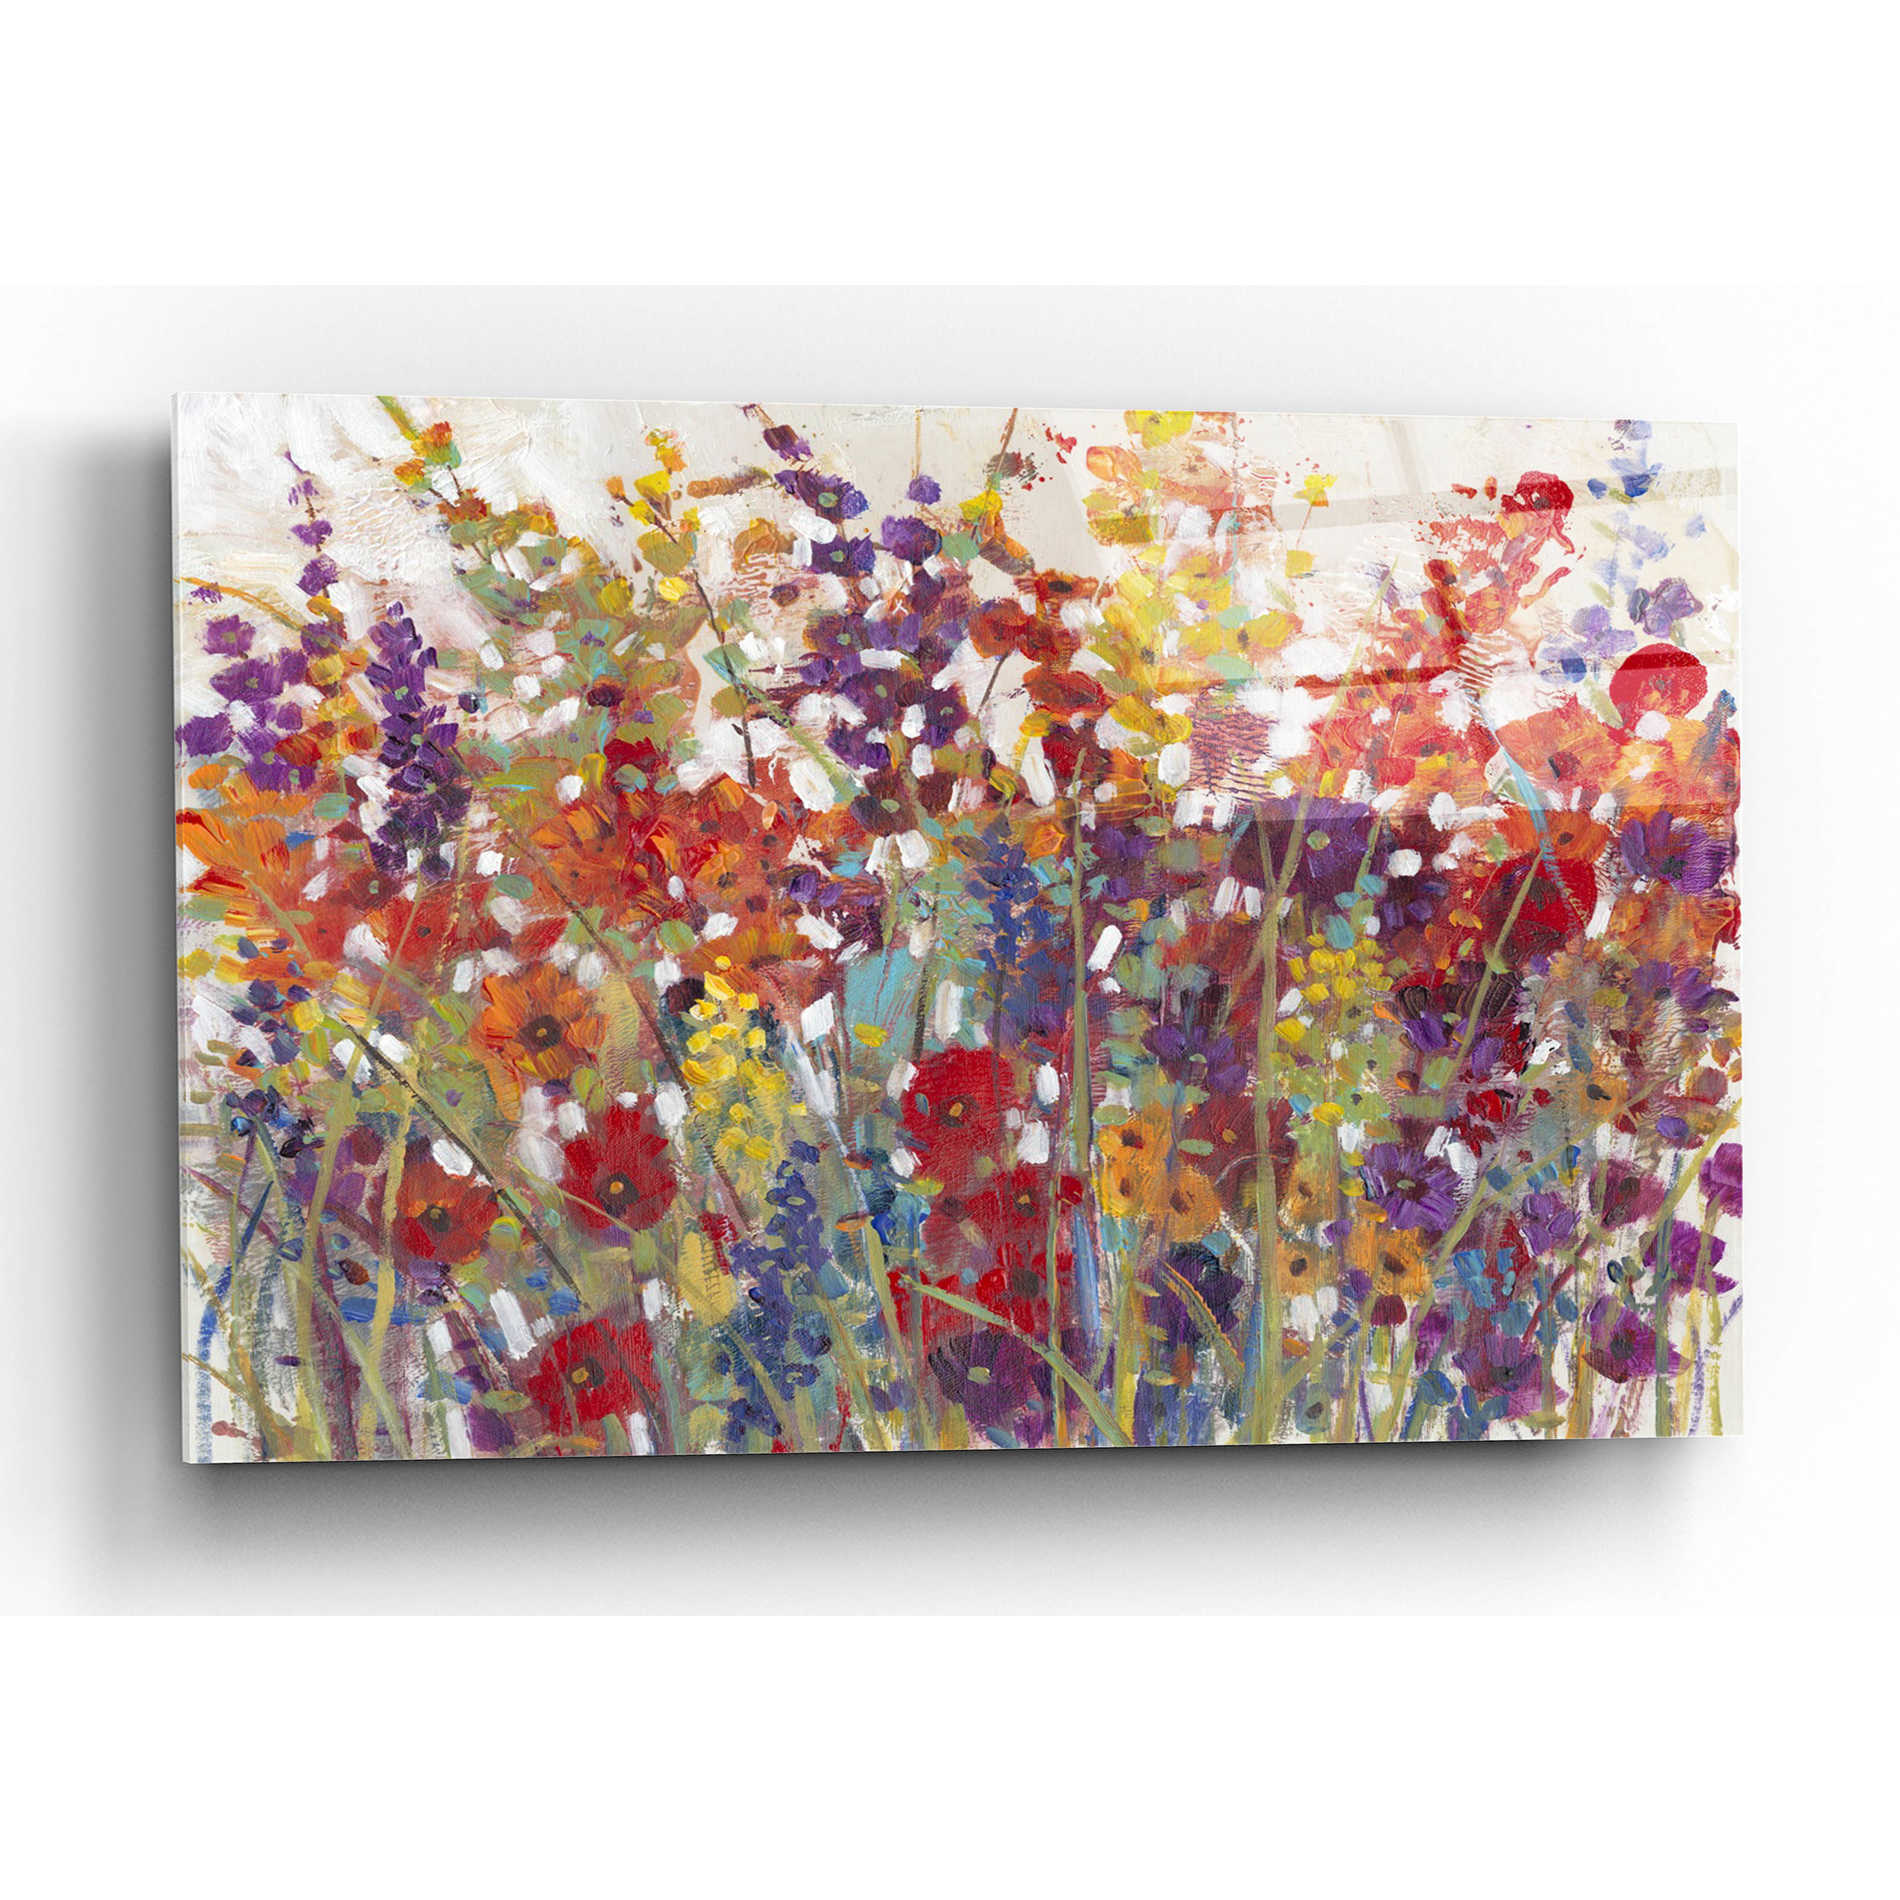 Epic Art 'Variety of Flowers II' by Tim O'Toole, Acrylic Glass Wall Art